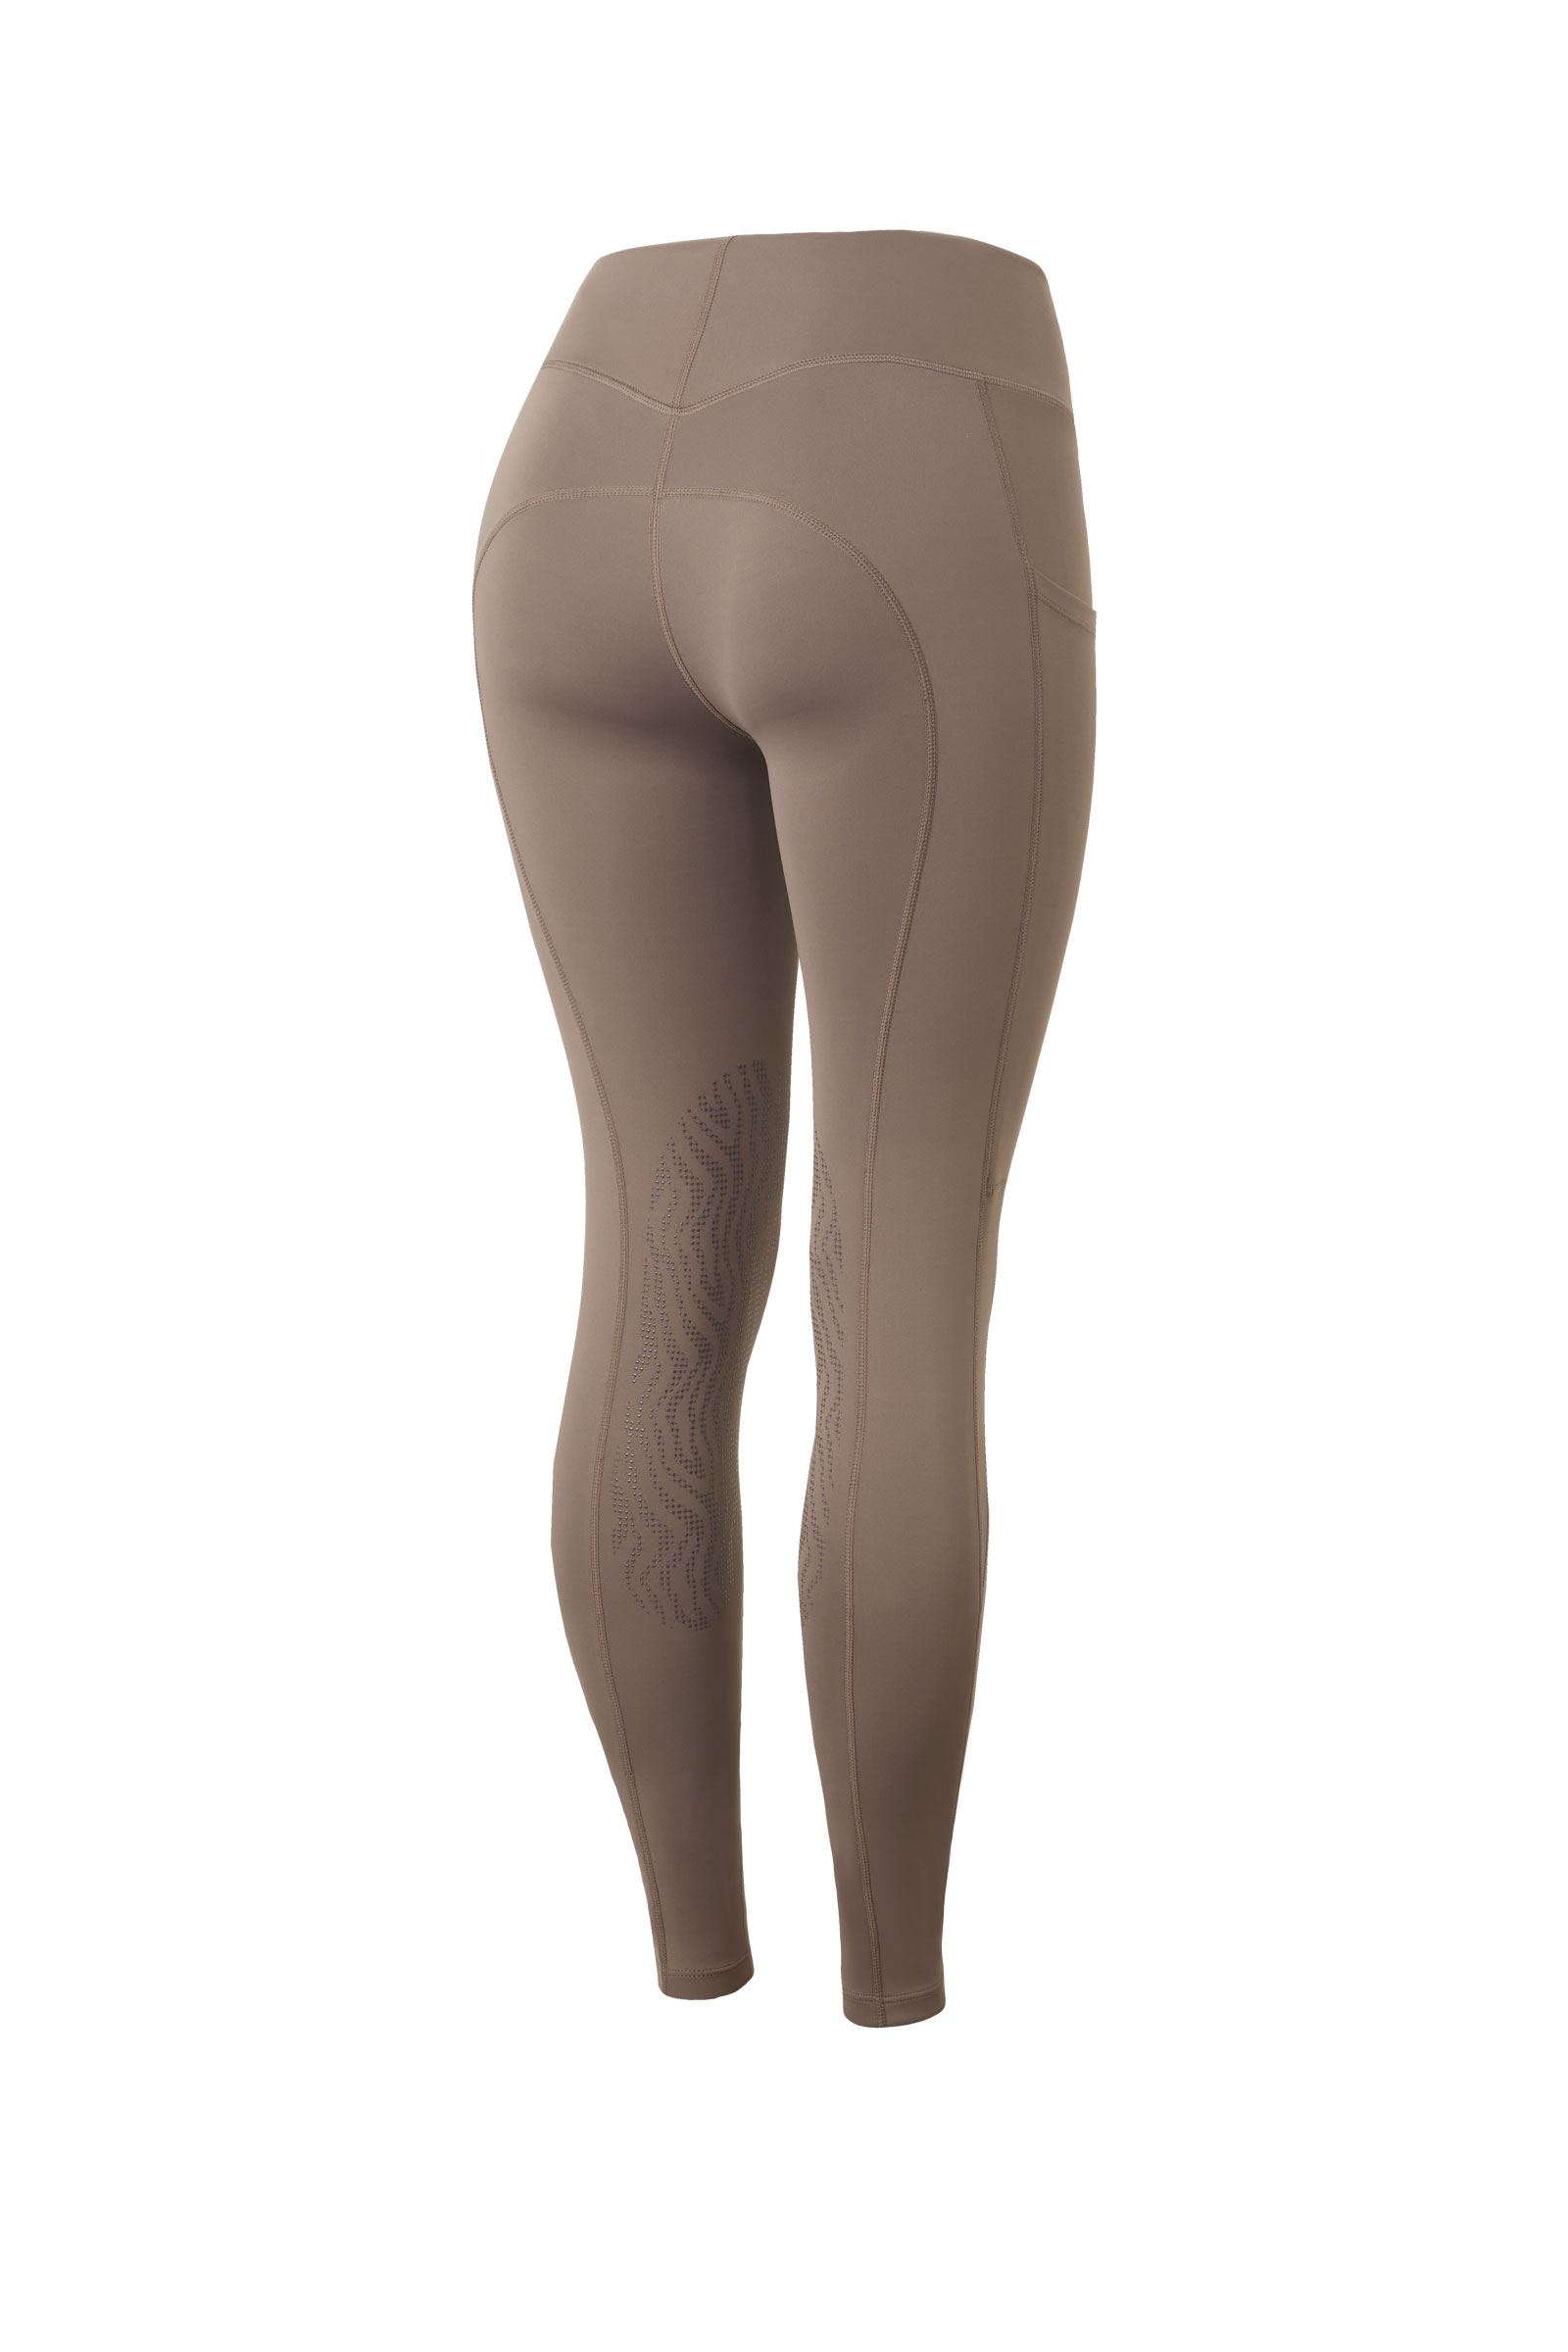 Ariat Breathe EOS Knee Patch Tights - Happy Horse Tack Shop